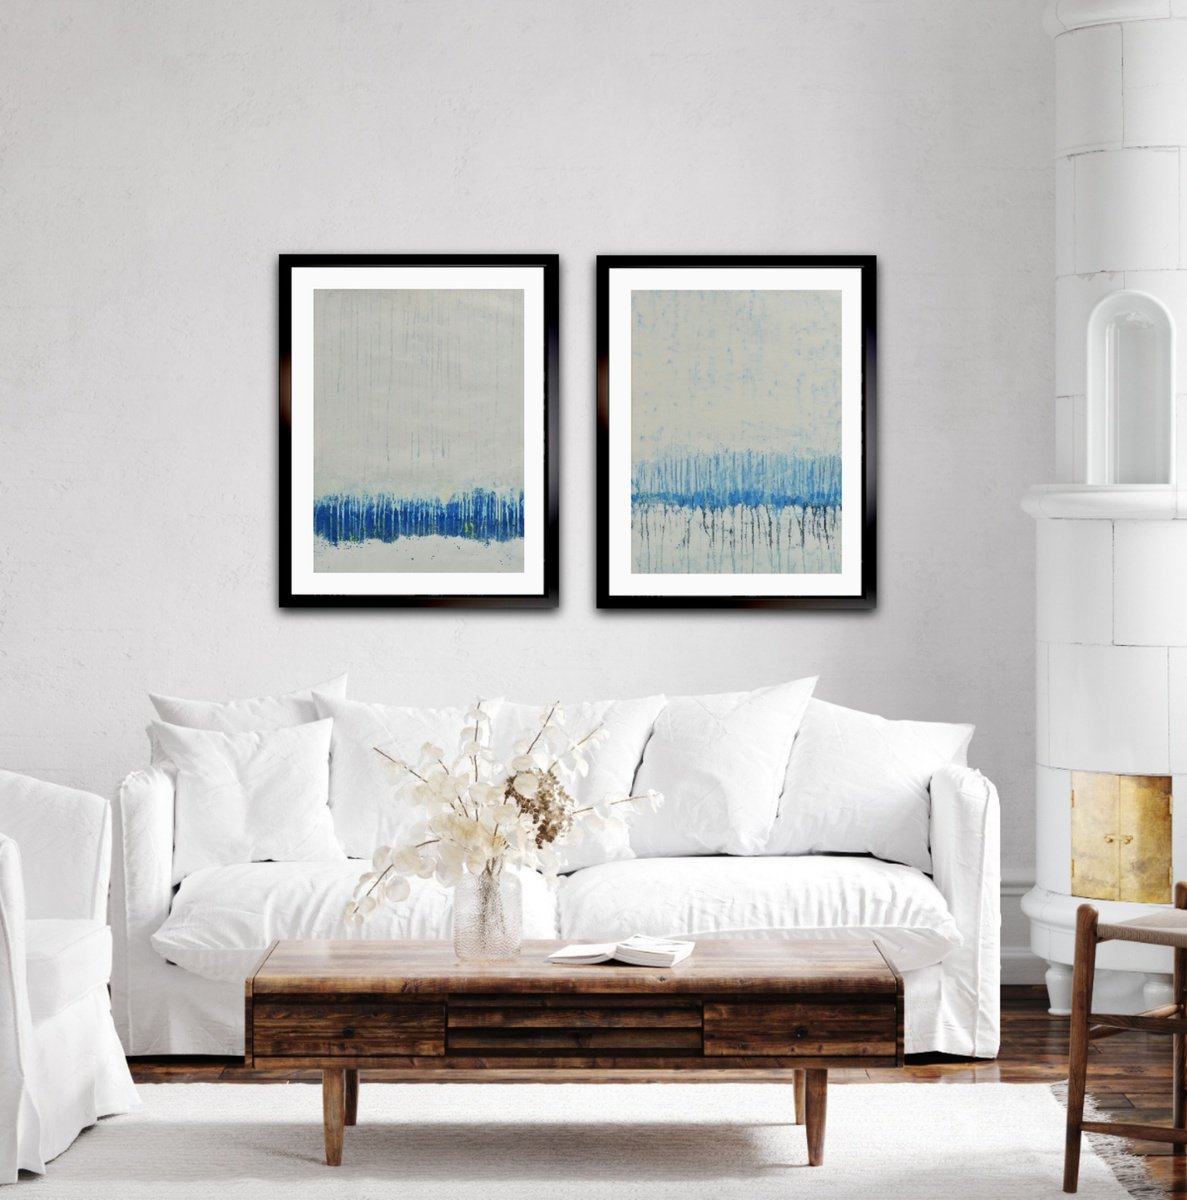 Blizzard Blue + Cerulean Frost - Abstract Diptych on Paper by Carney